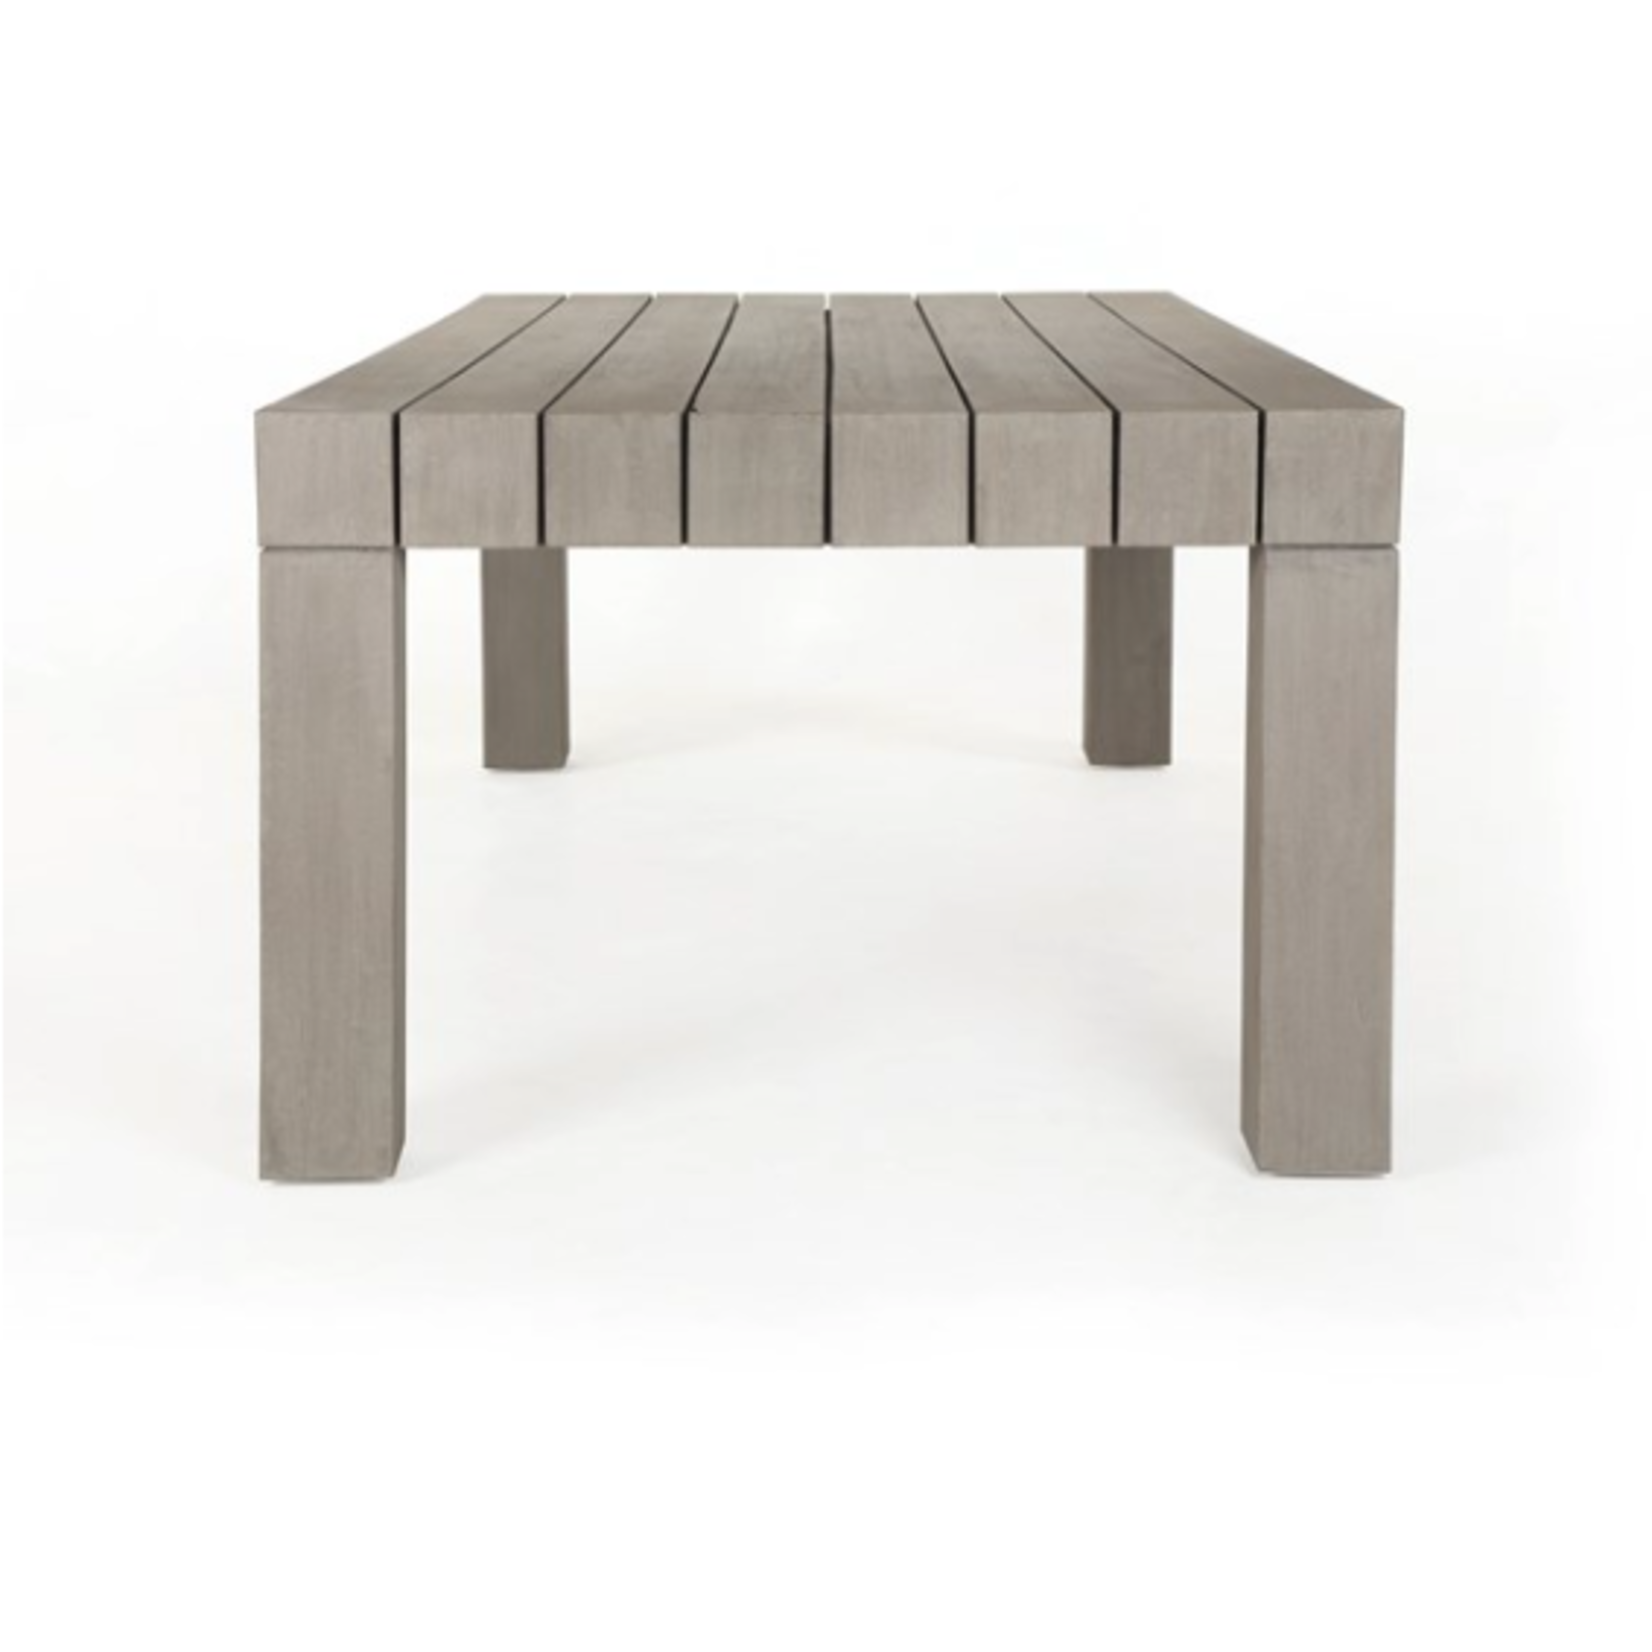 87x42 Sonora Solid Teak Wood Outdoor Dining Table In Gray